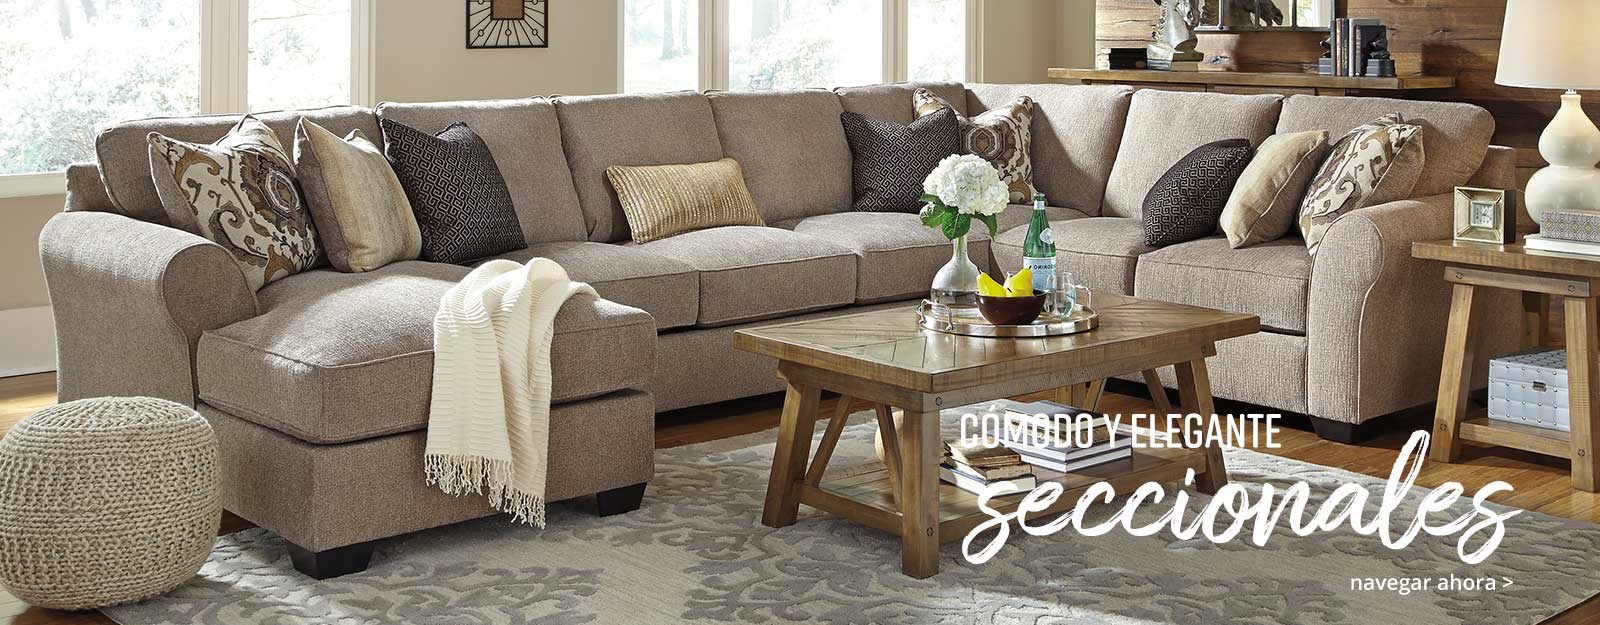 Comfy and Stylish Sectional Sofas